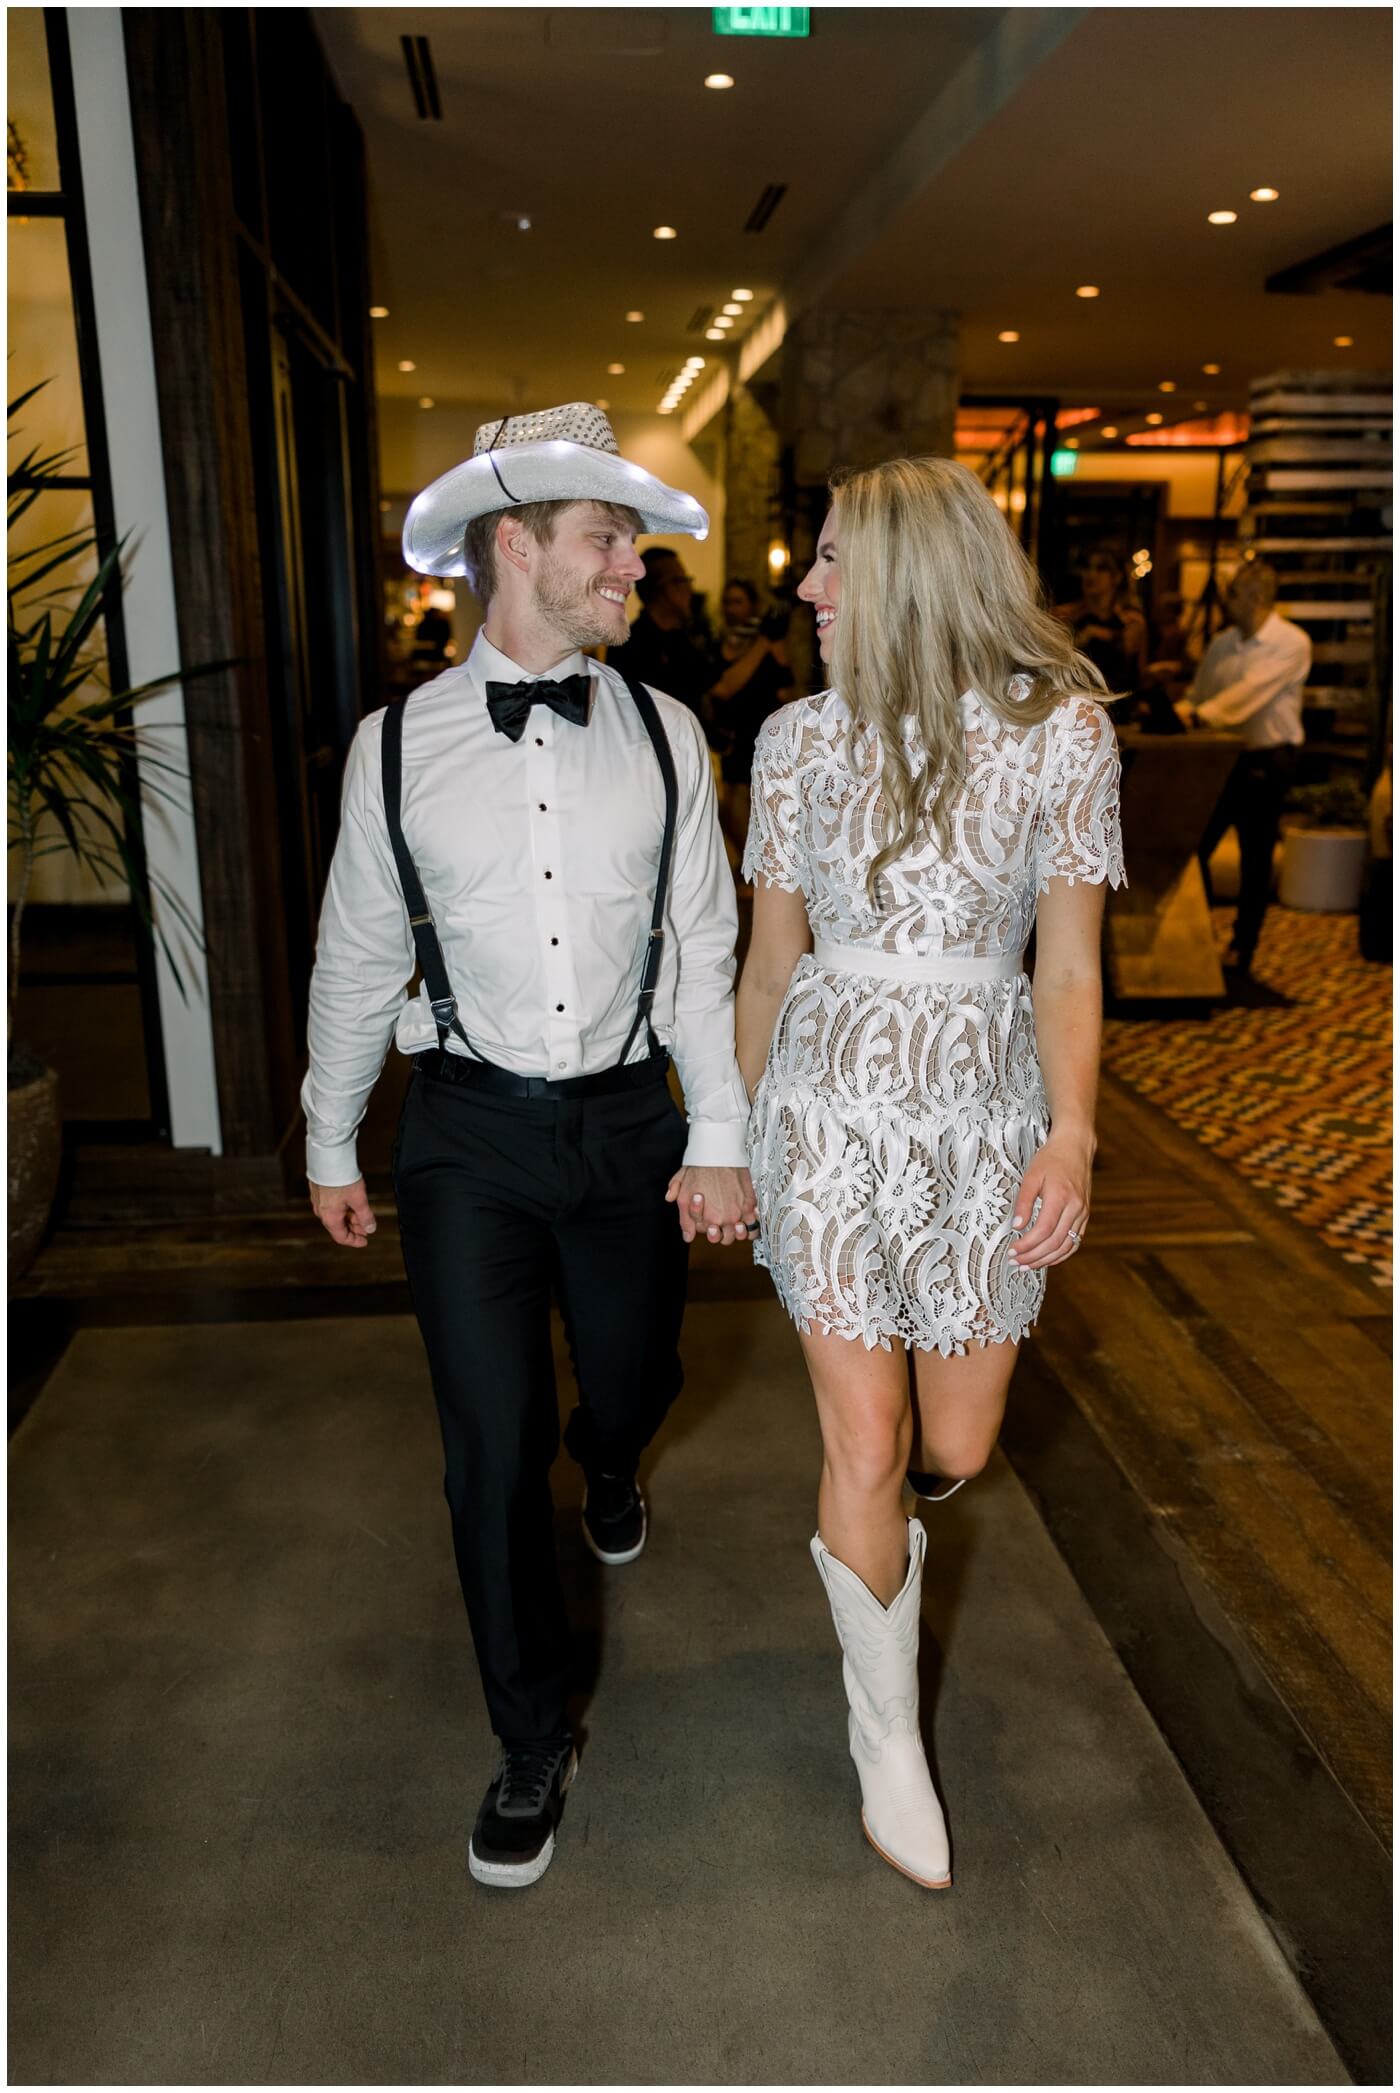 Bride and groom smile as they walk through the Hotel Drover